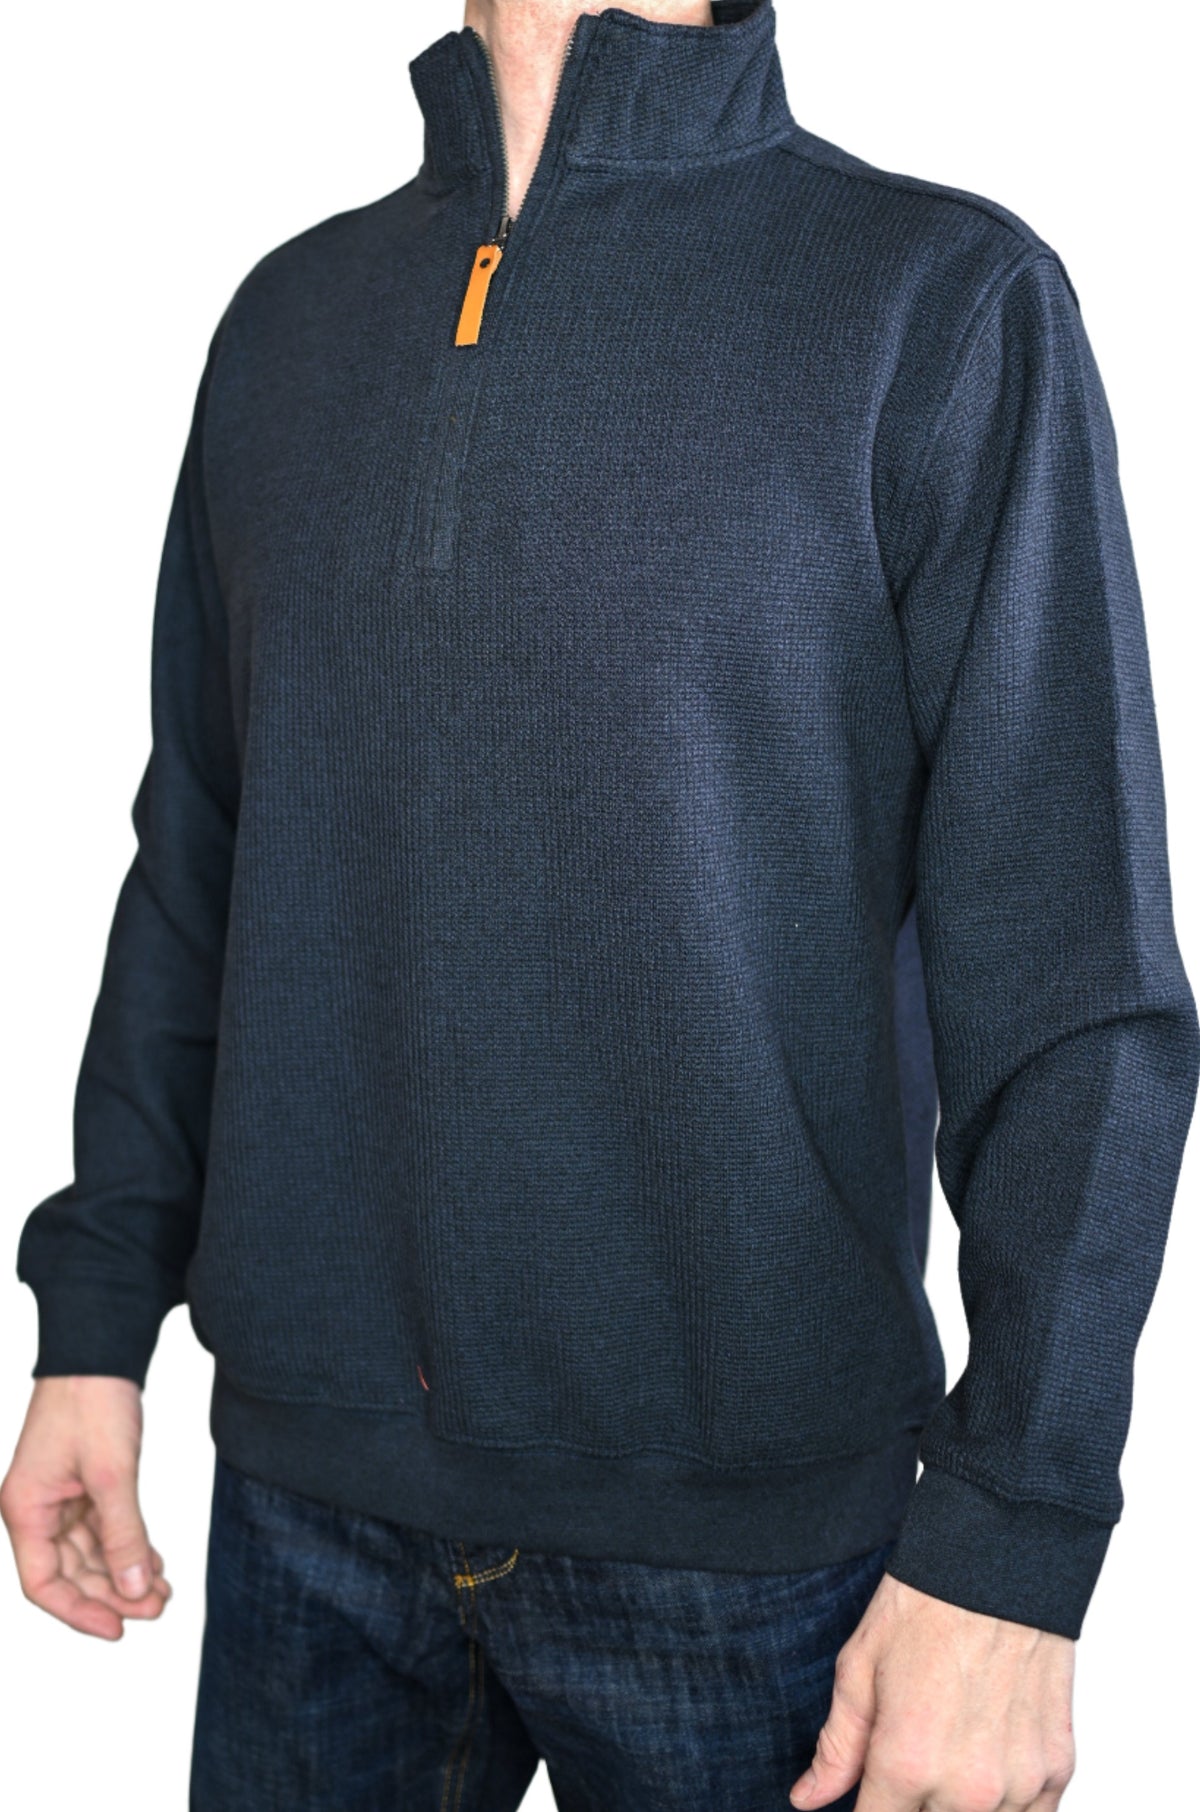 Woodland Trail 1/4 Zip Pullover Sweater